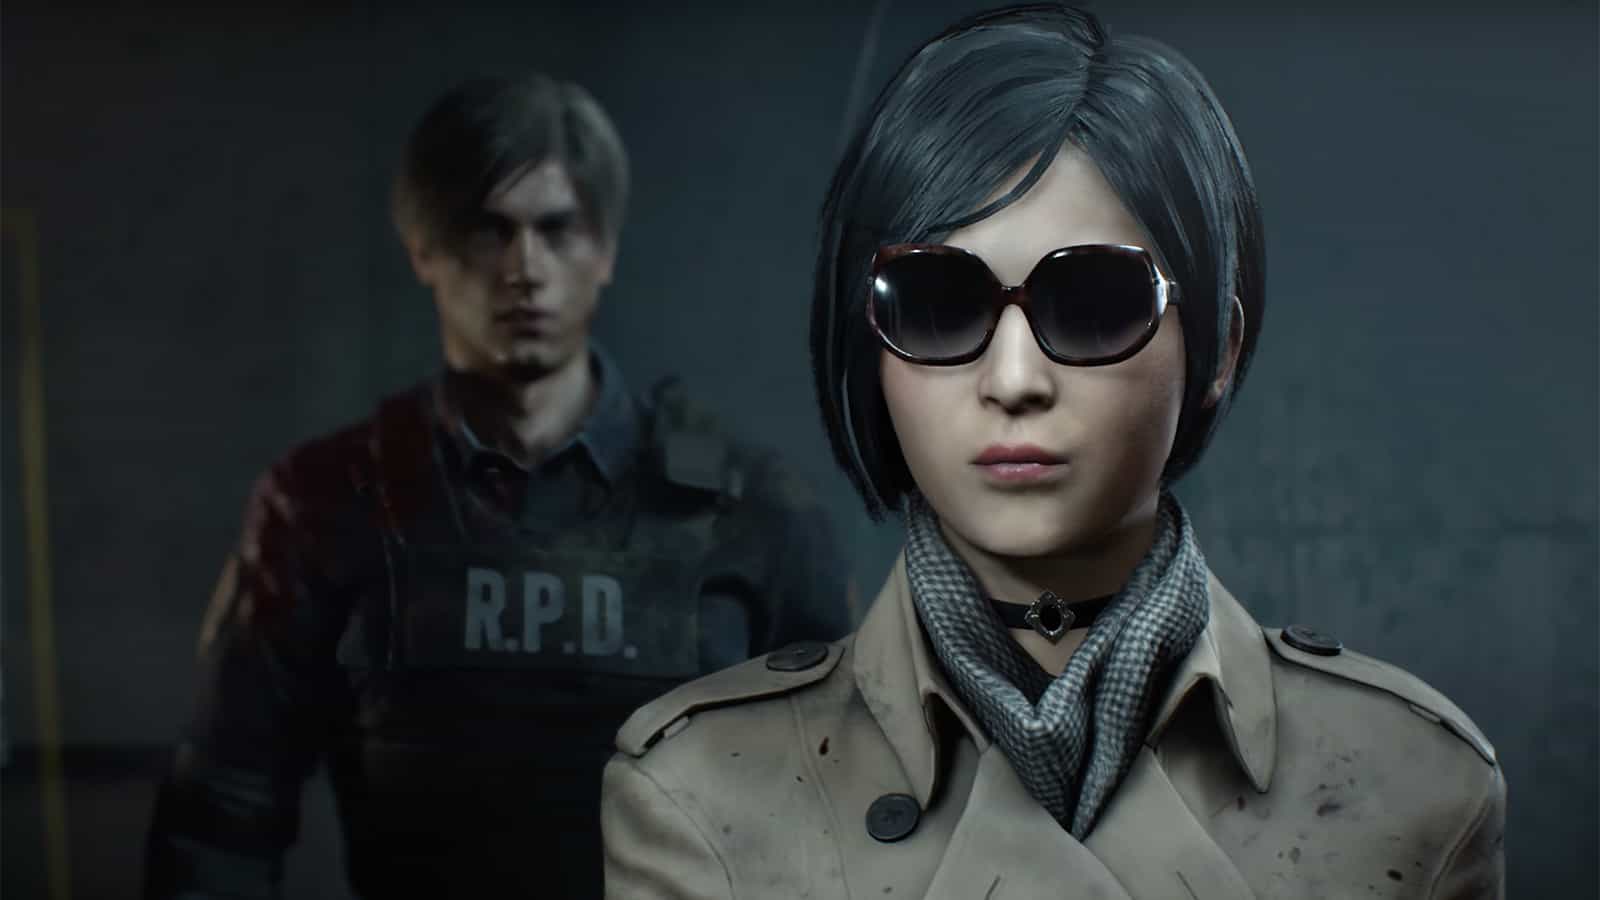 PS5 And Xbox Series Upgrades Announced For Resident Evil 2, 3, And 7